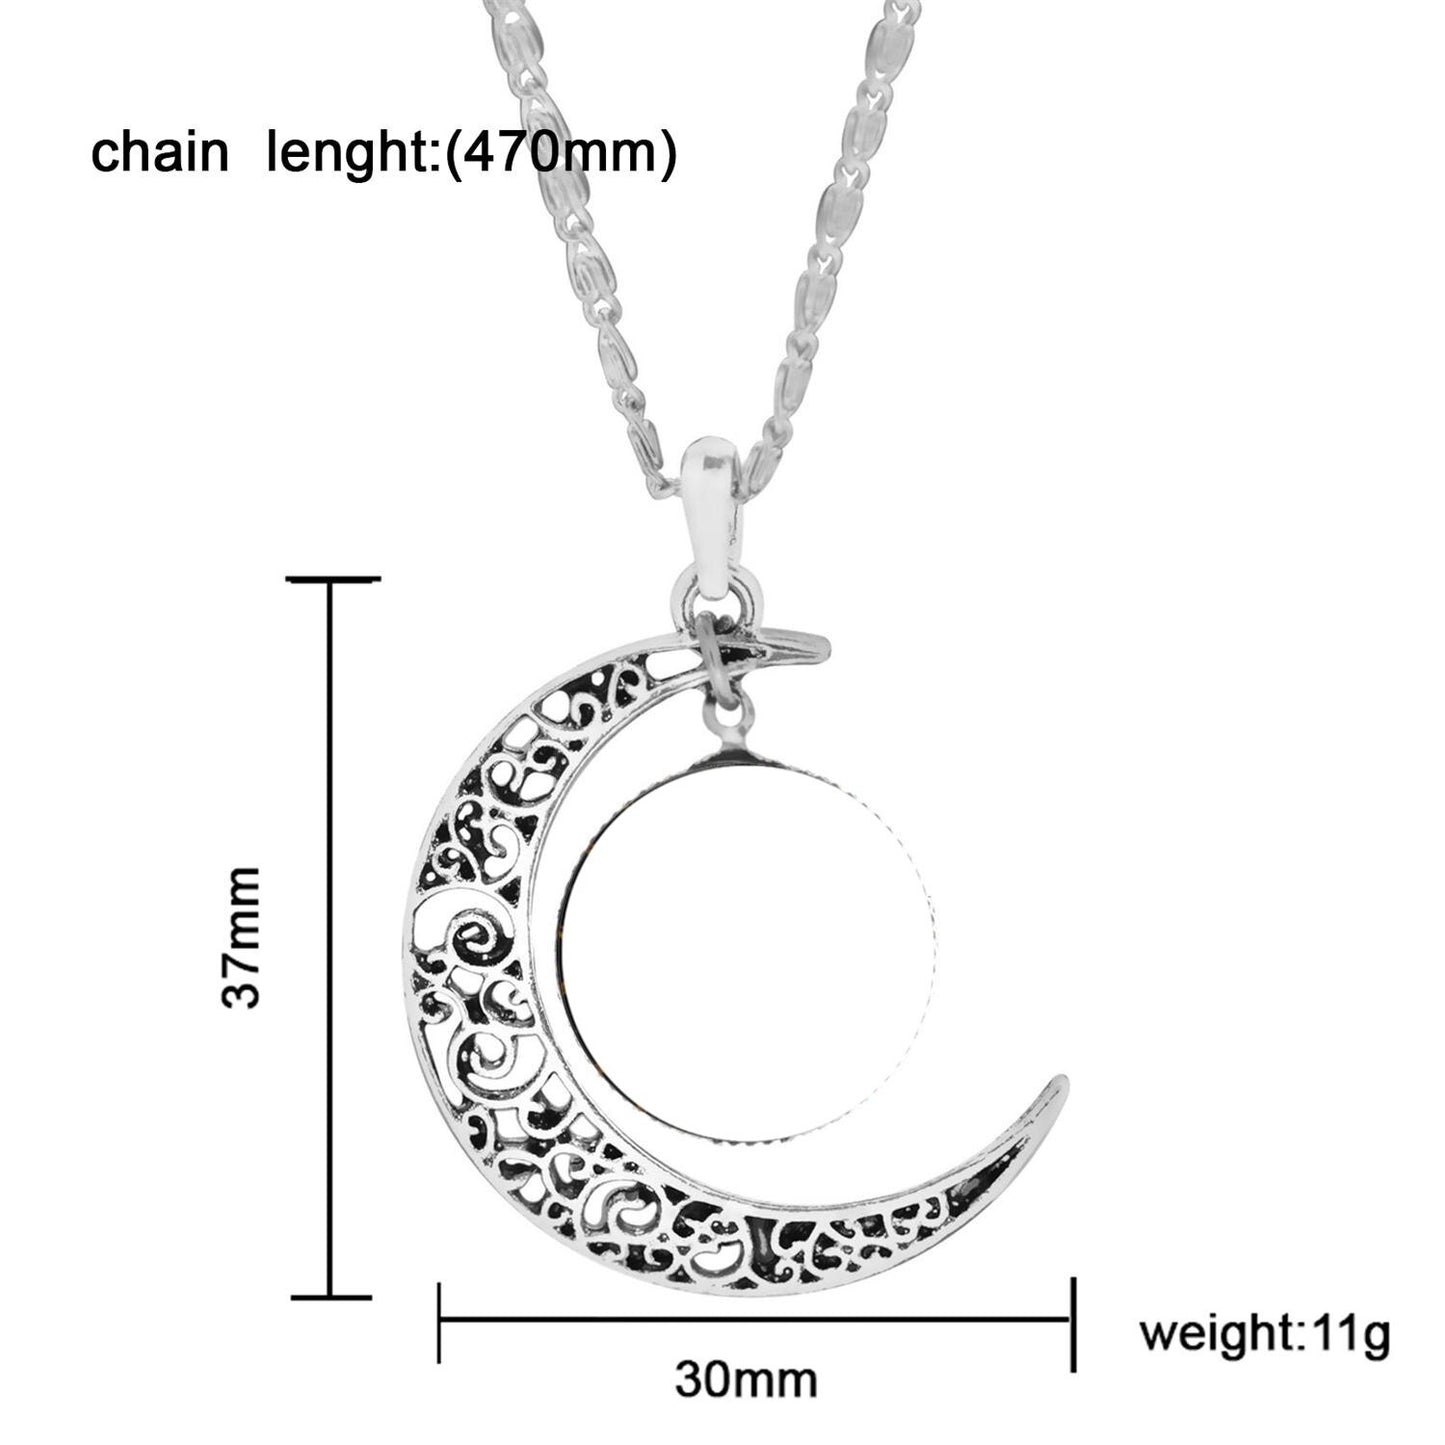 Skull Crescent Moon Necklace Antique  Glass Pendant Necklace Sugar Skull Jewelry